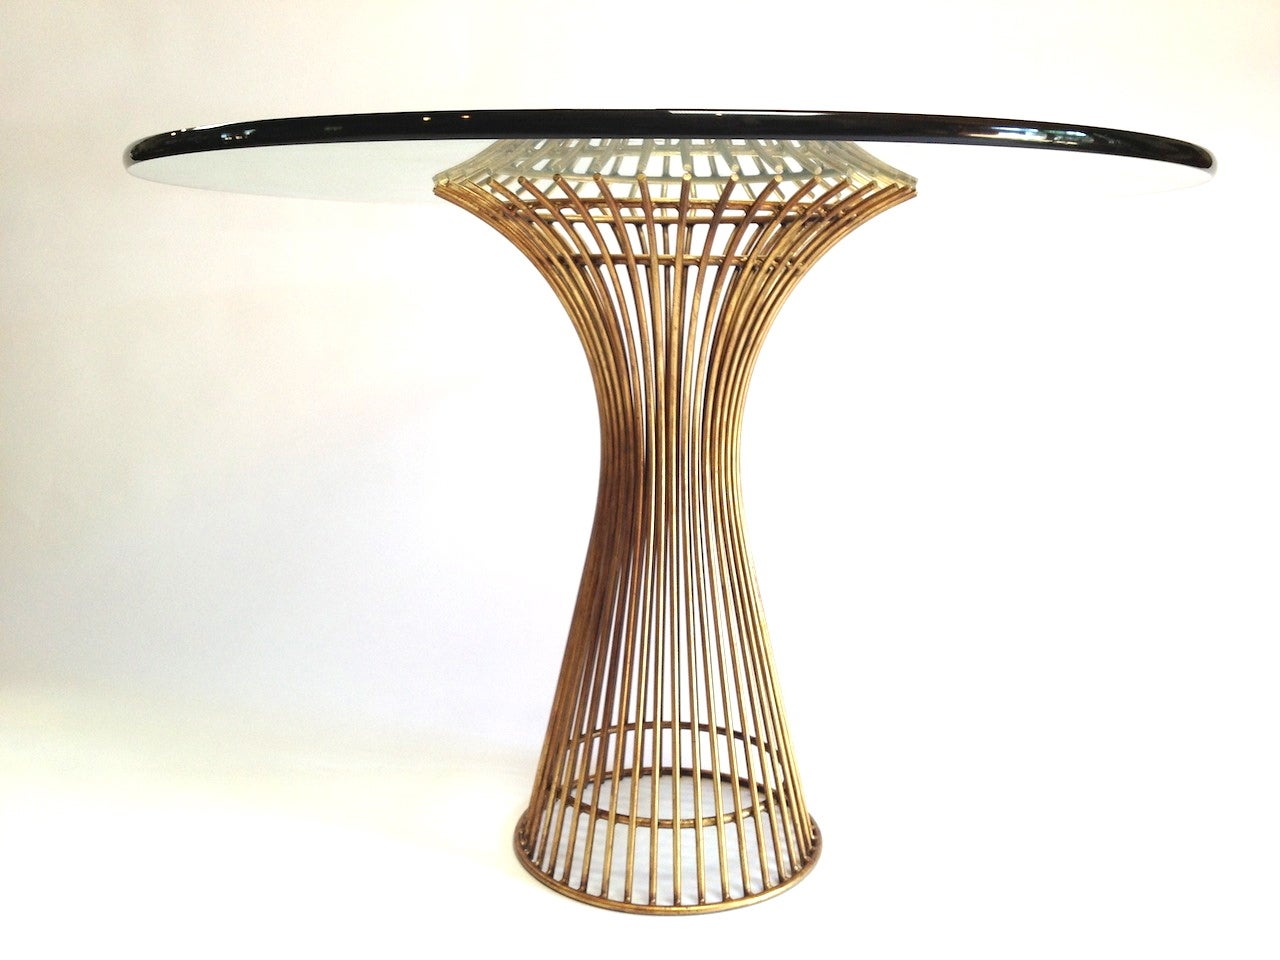 Gold Colored Platner Style Dining Or Cafe Table Base